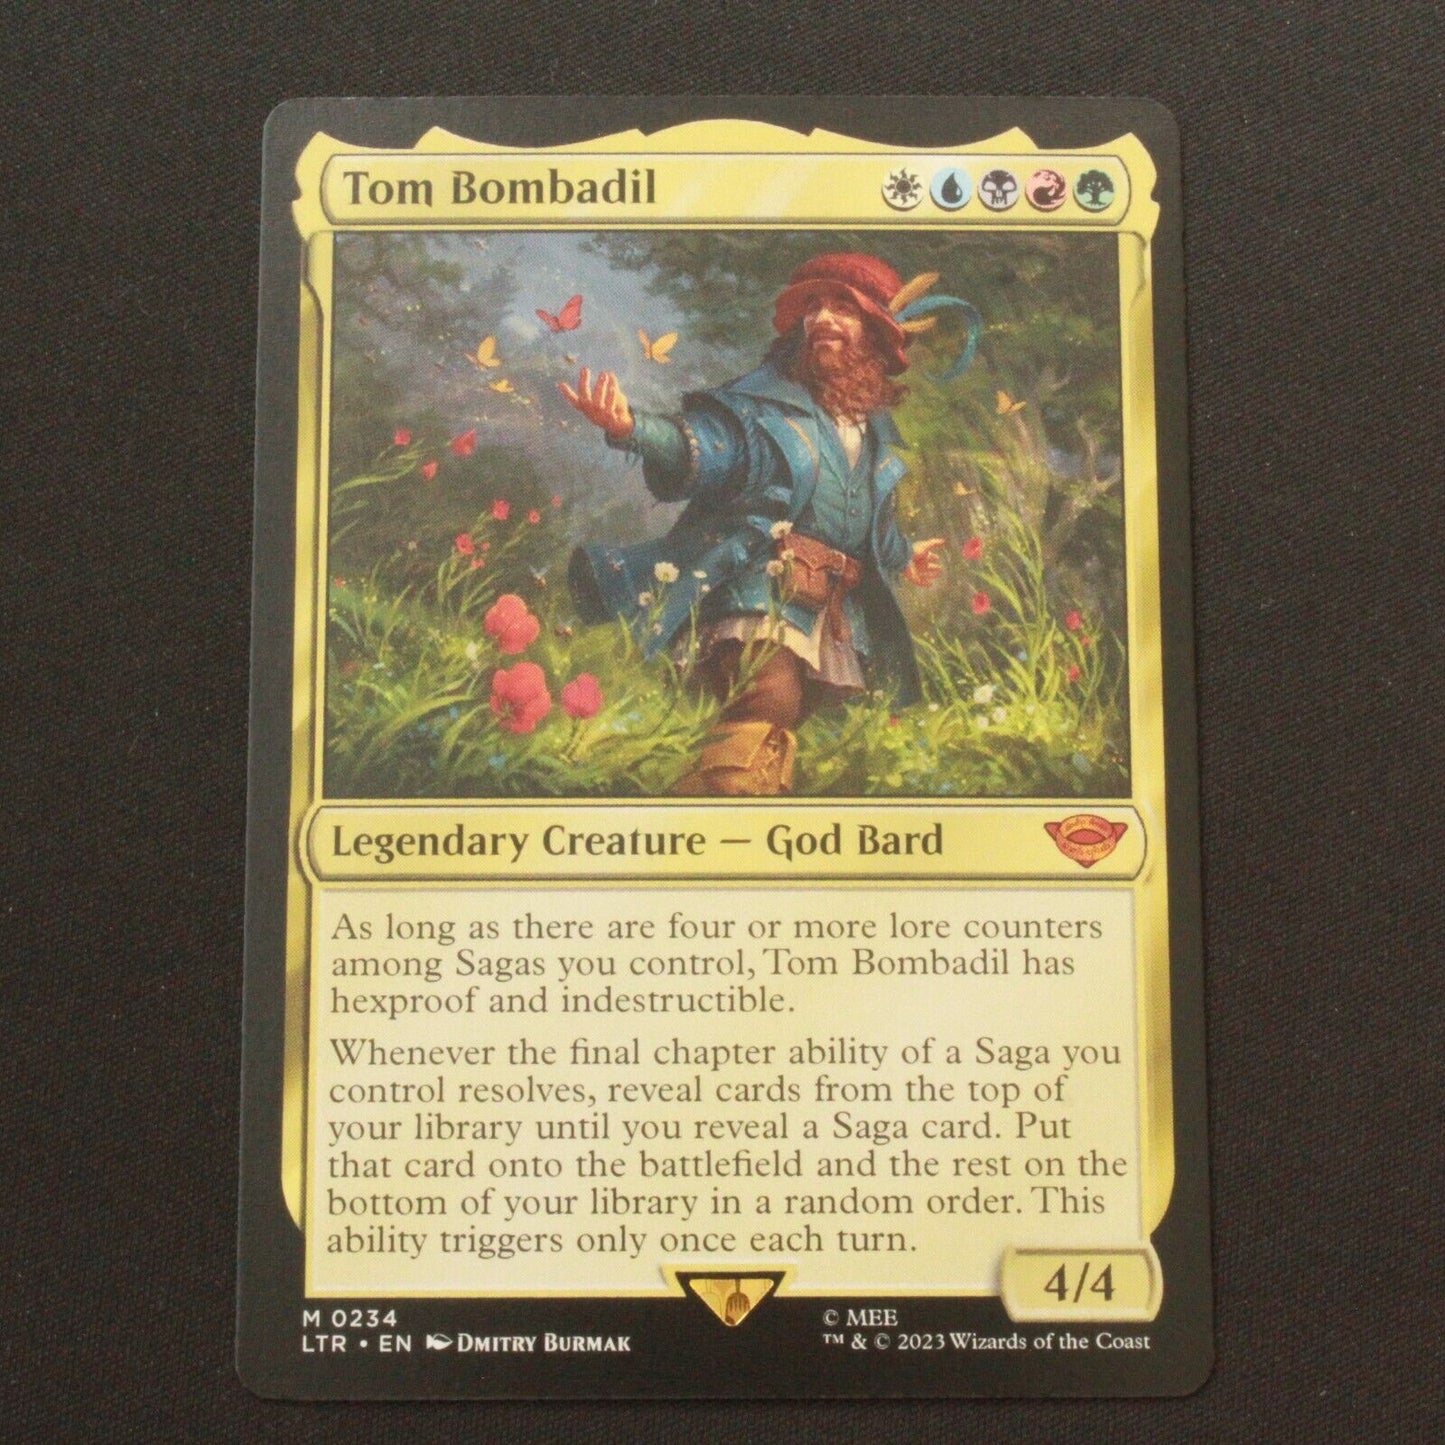 MTG The Lord of the Rings (LTR) Mythic Tom Bombadil 234 NM